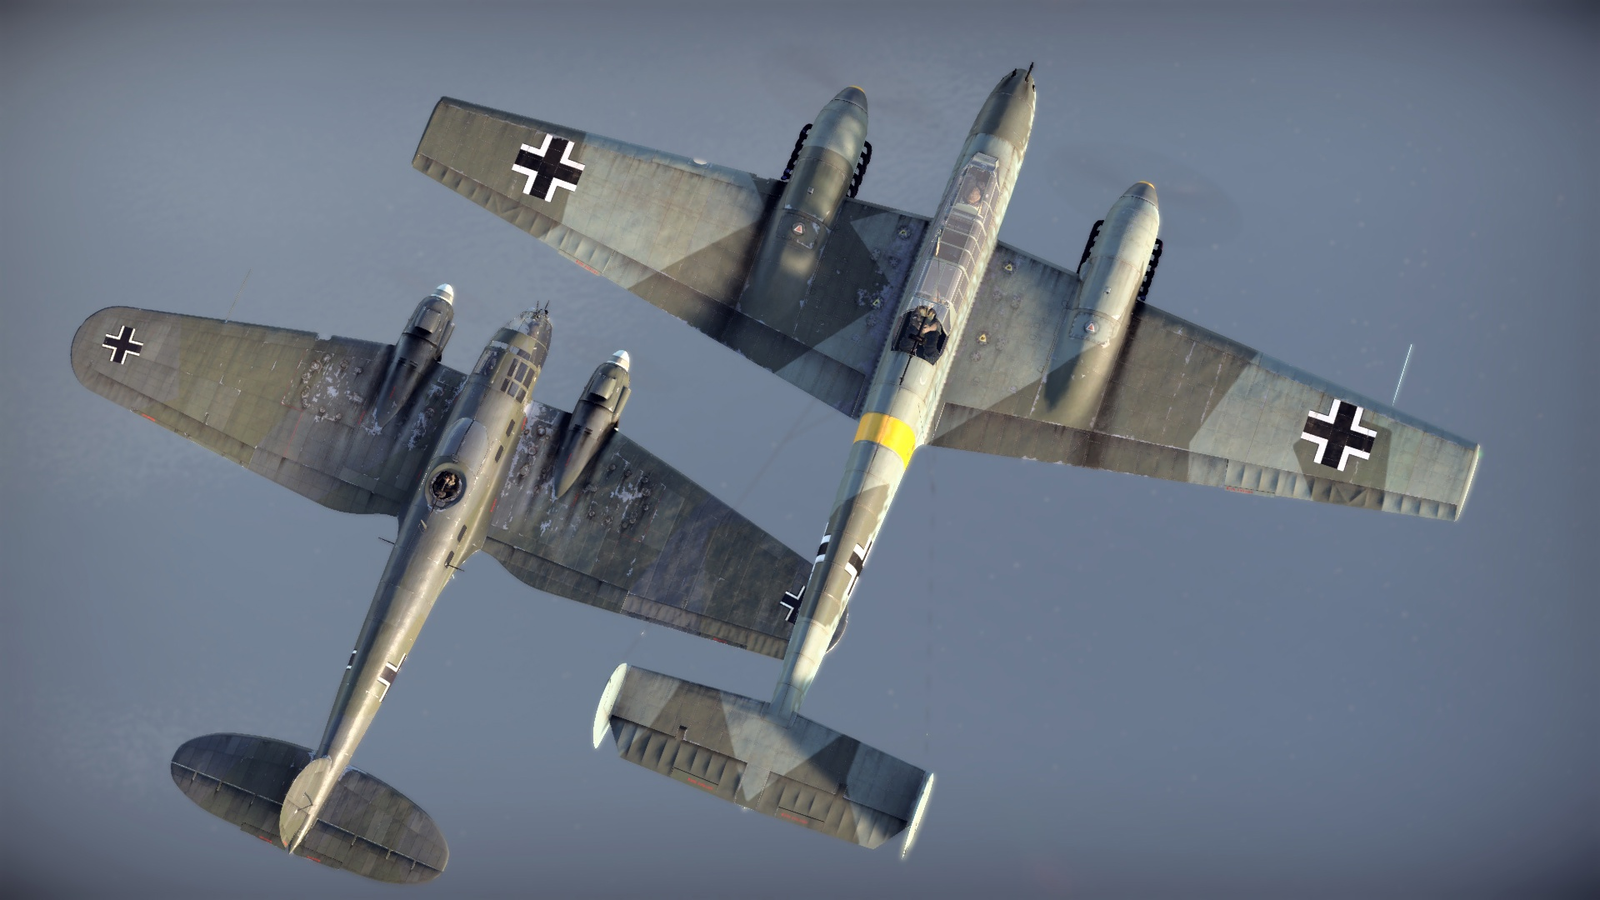 Special] US Armed Forces Day - News - War Thunder